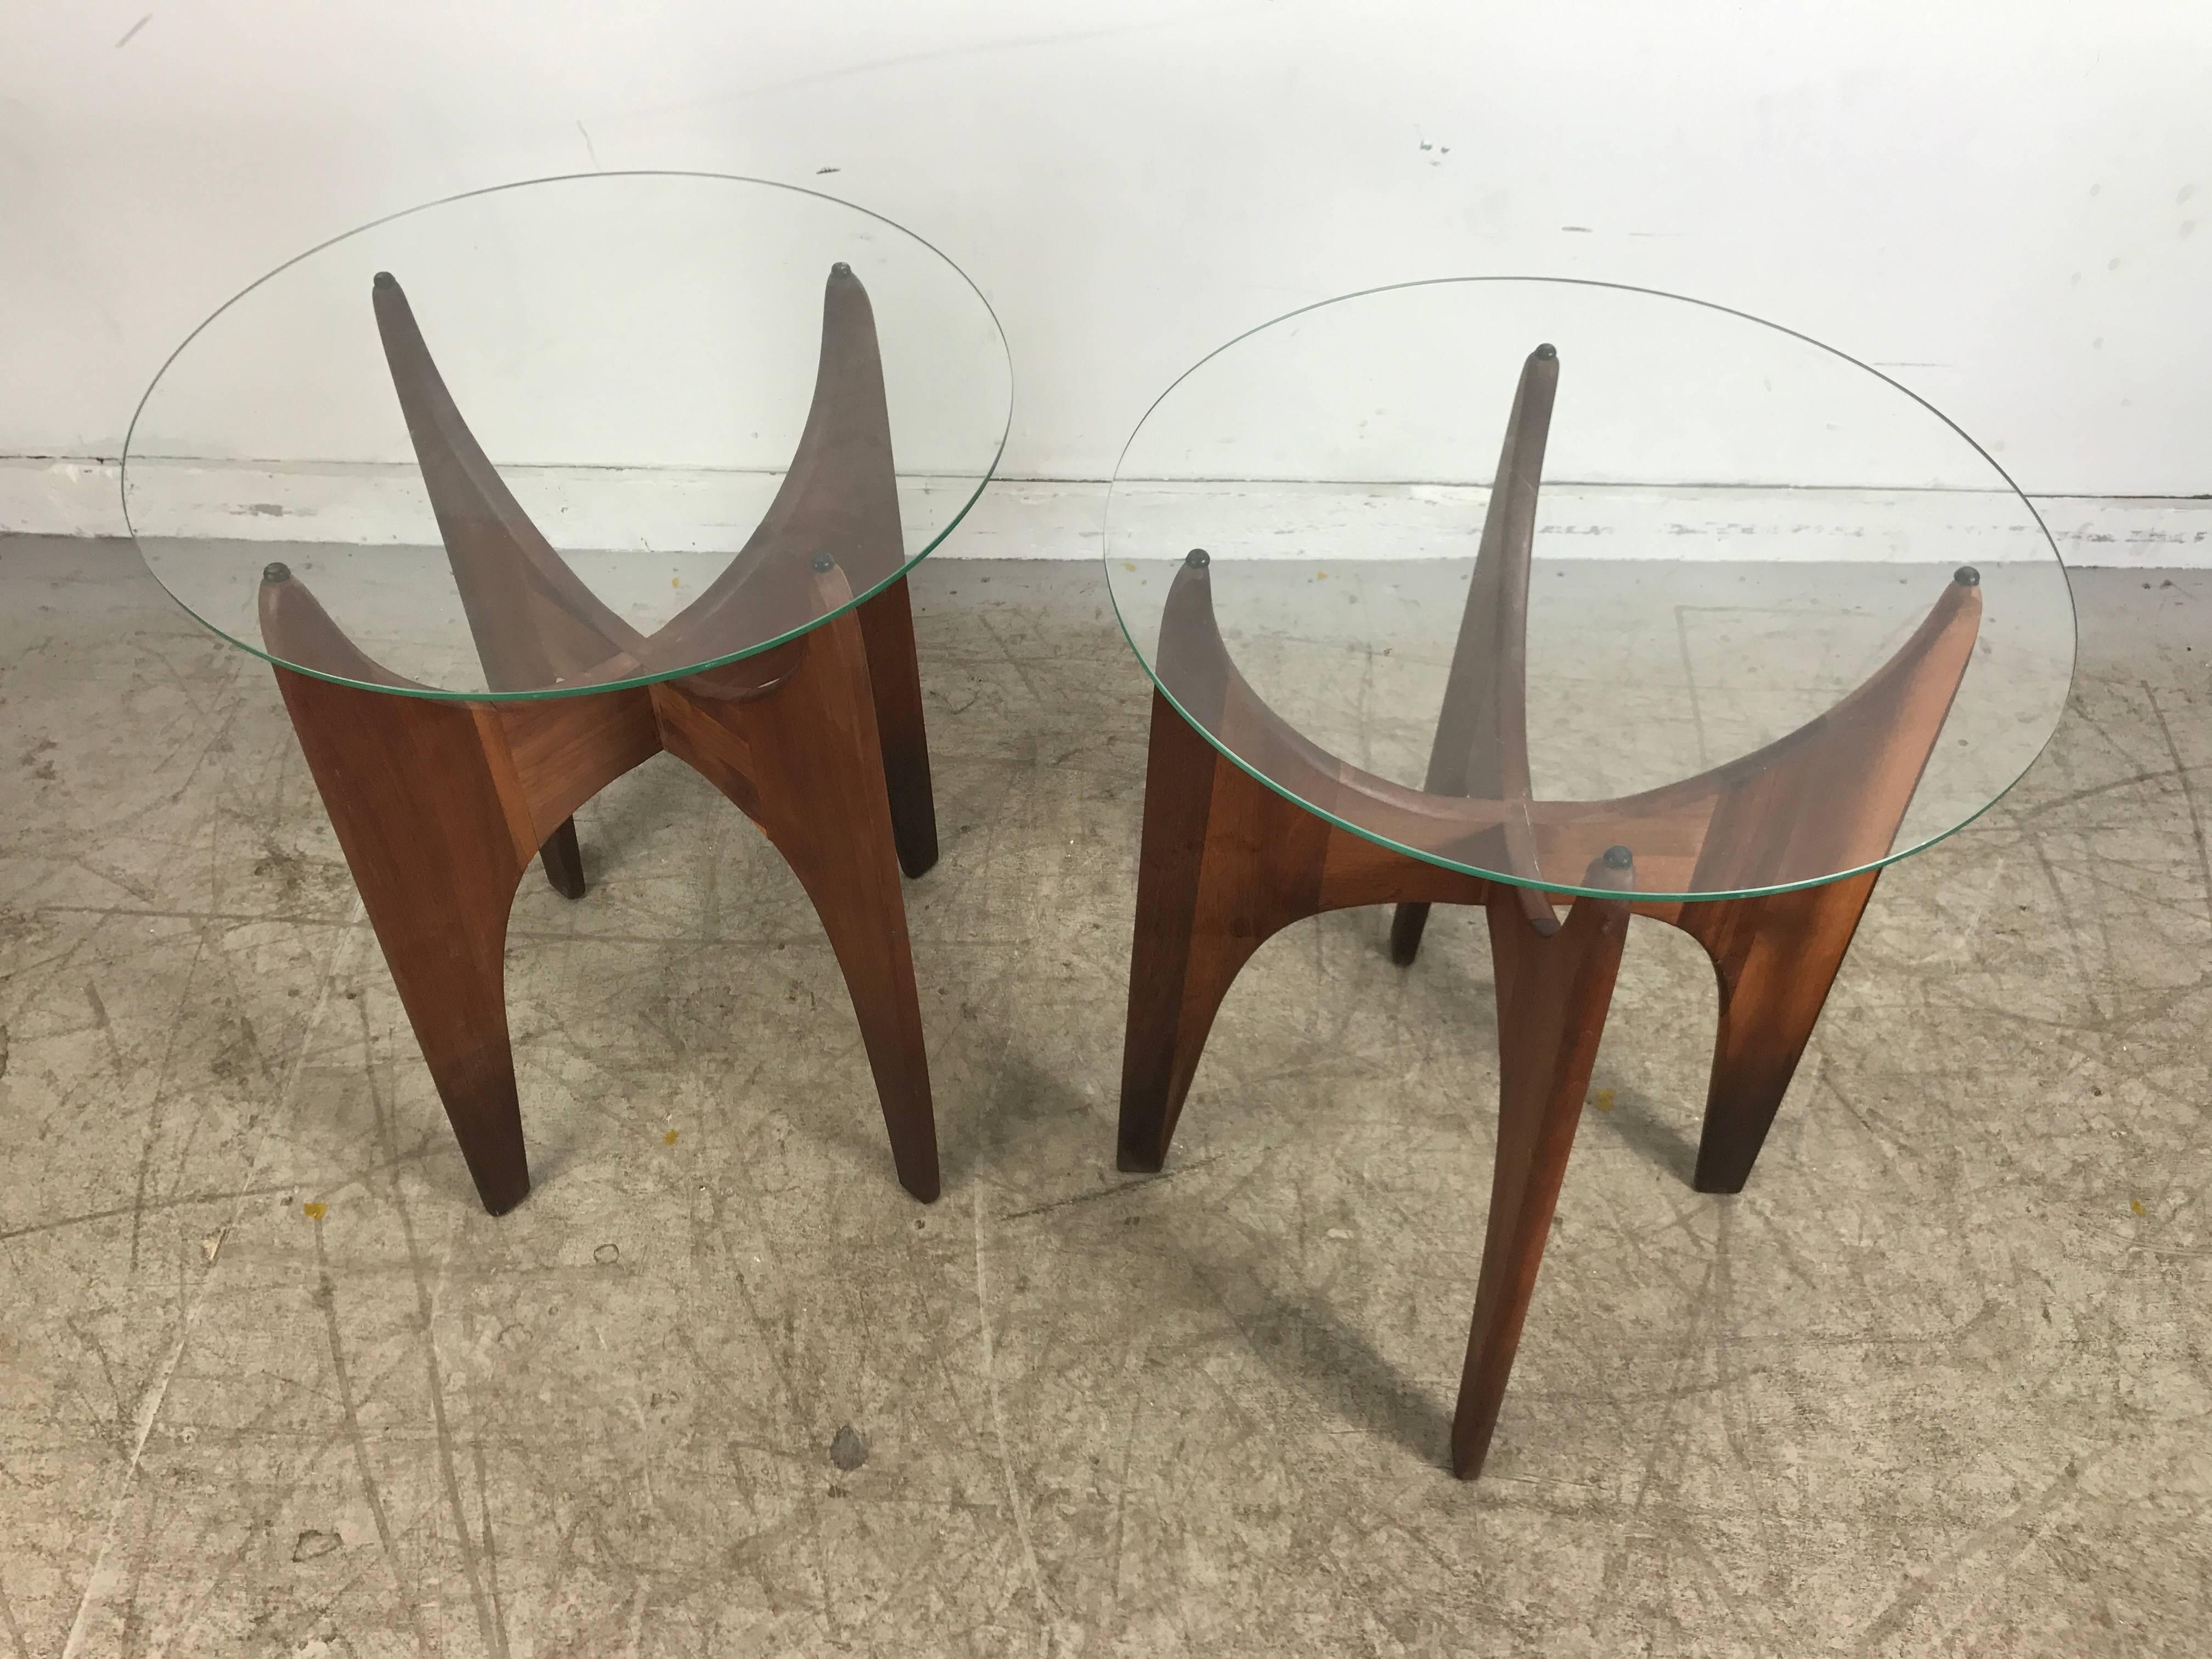 Classic Mid-Century Modern, seldom seen pair of tall jax end or lamp tables designed by Adrian Pearsall. Beautiful sculpted walnut bases, glass tops.